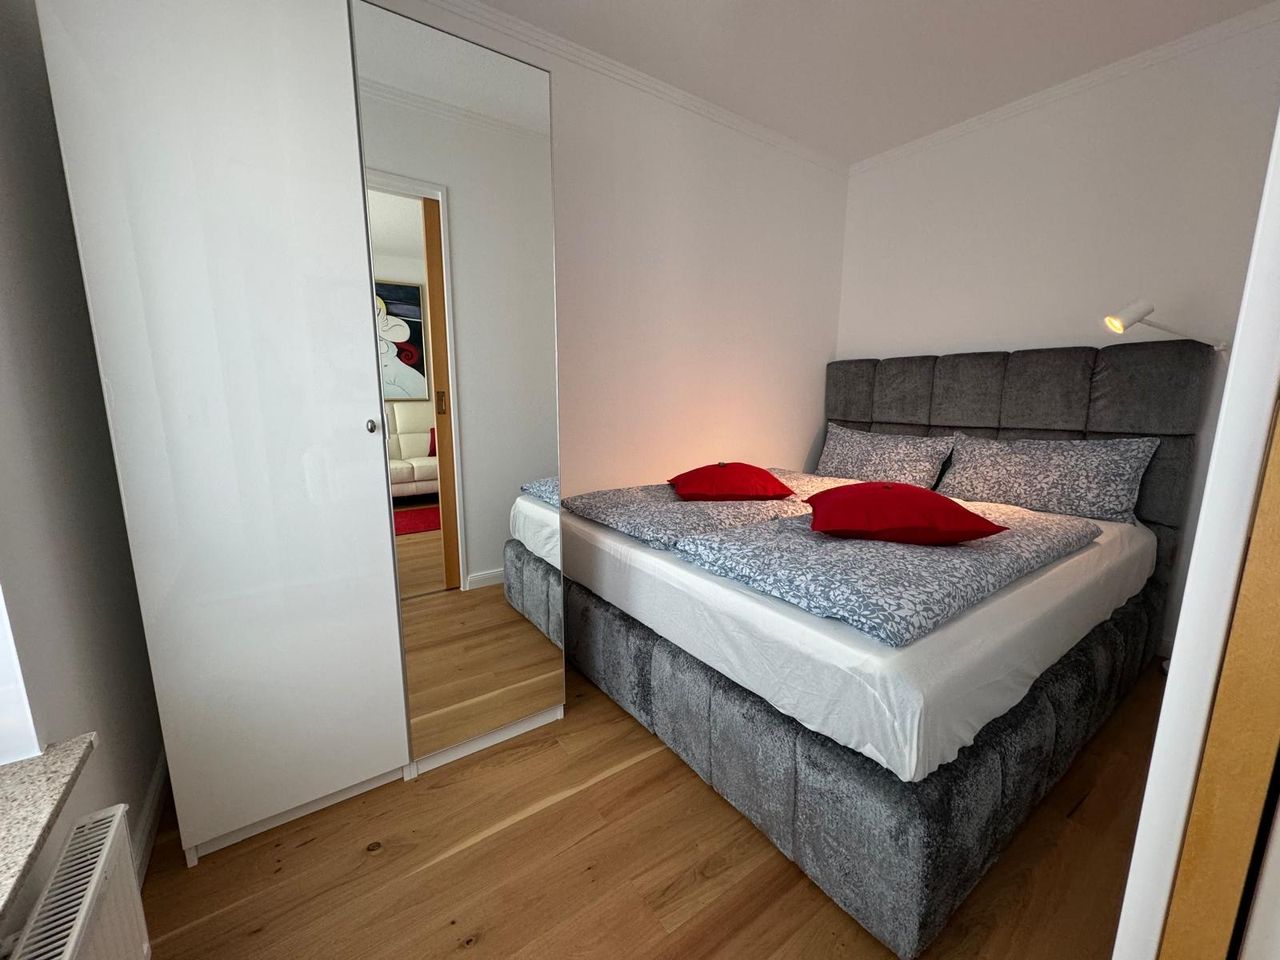 Great, lovely flat located in Rostock